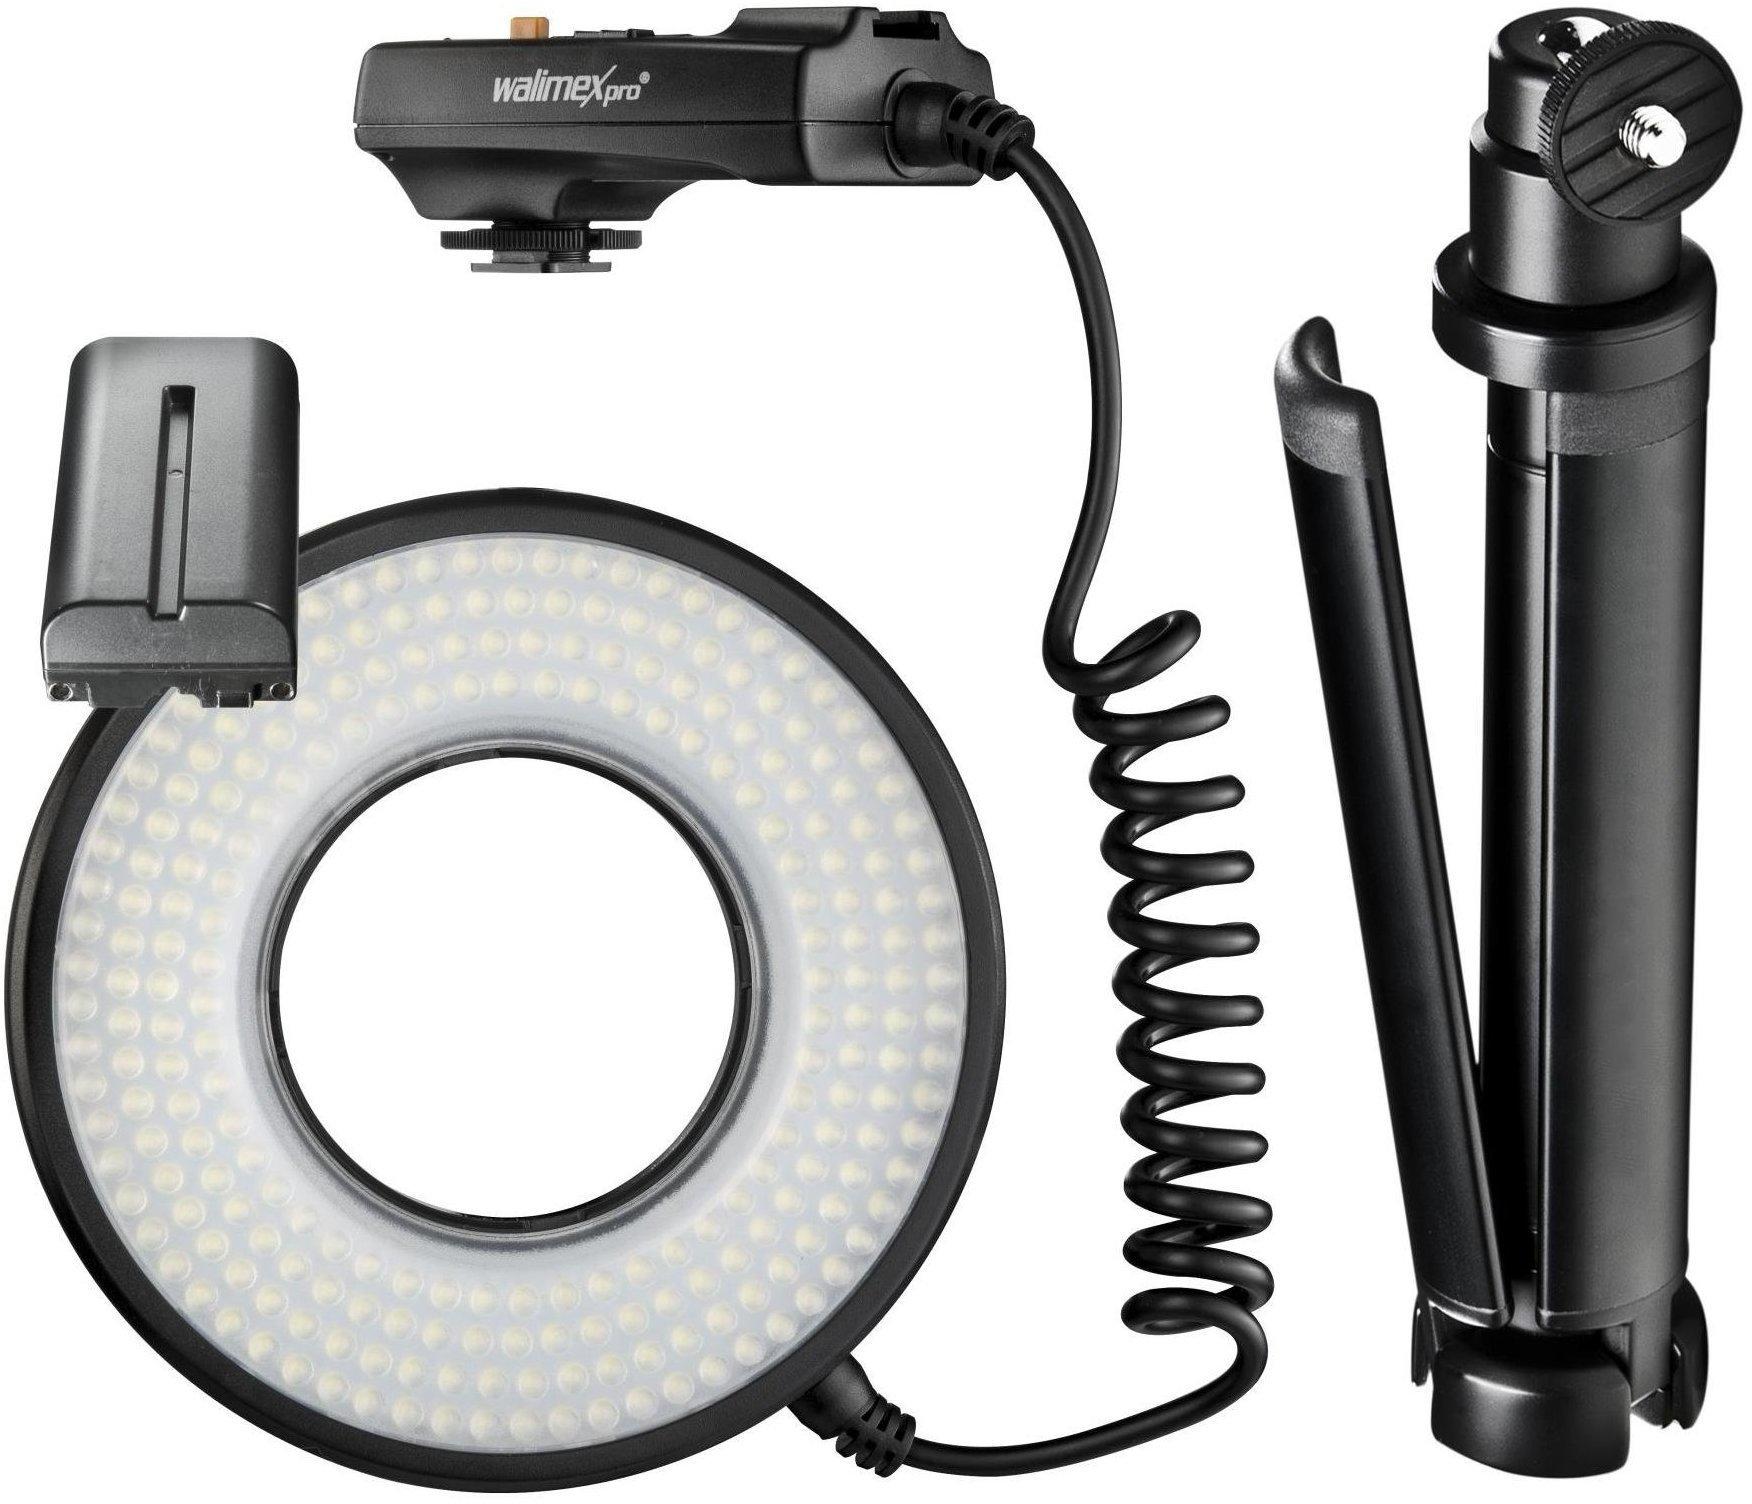 Walimex pro Macro LED Ringlicht DSR 232 Set Test TOP Angebote ab 161,00 €  (August 2023)